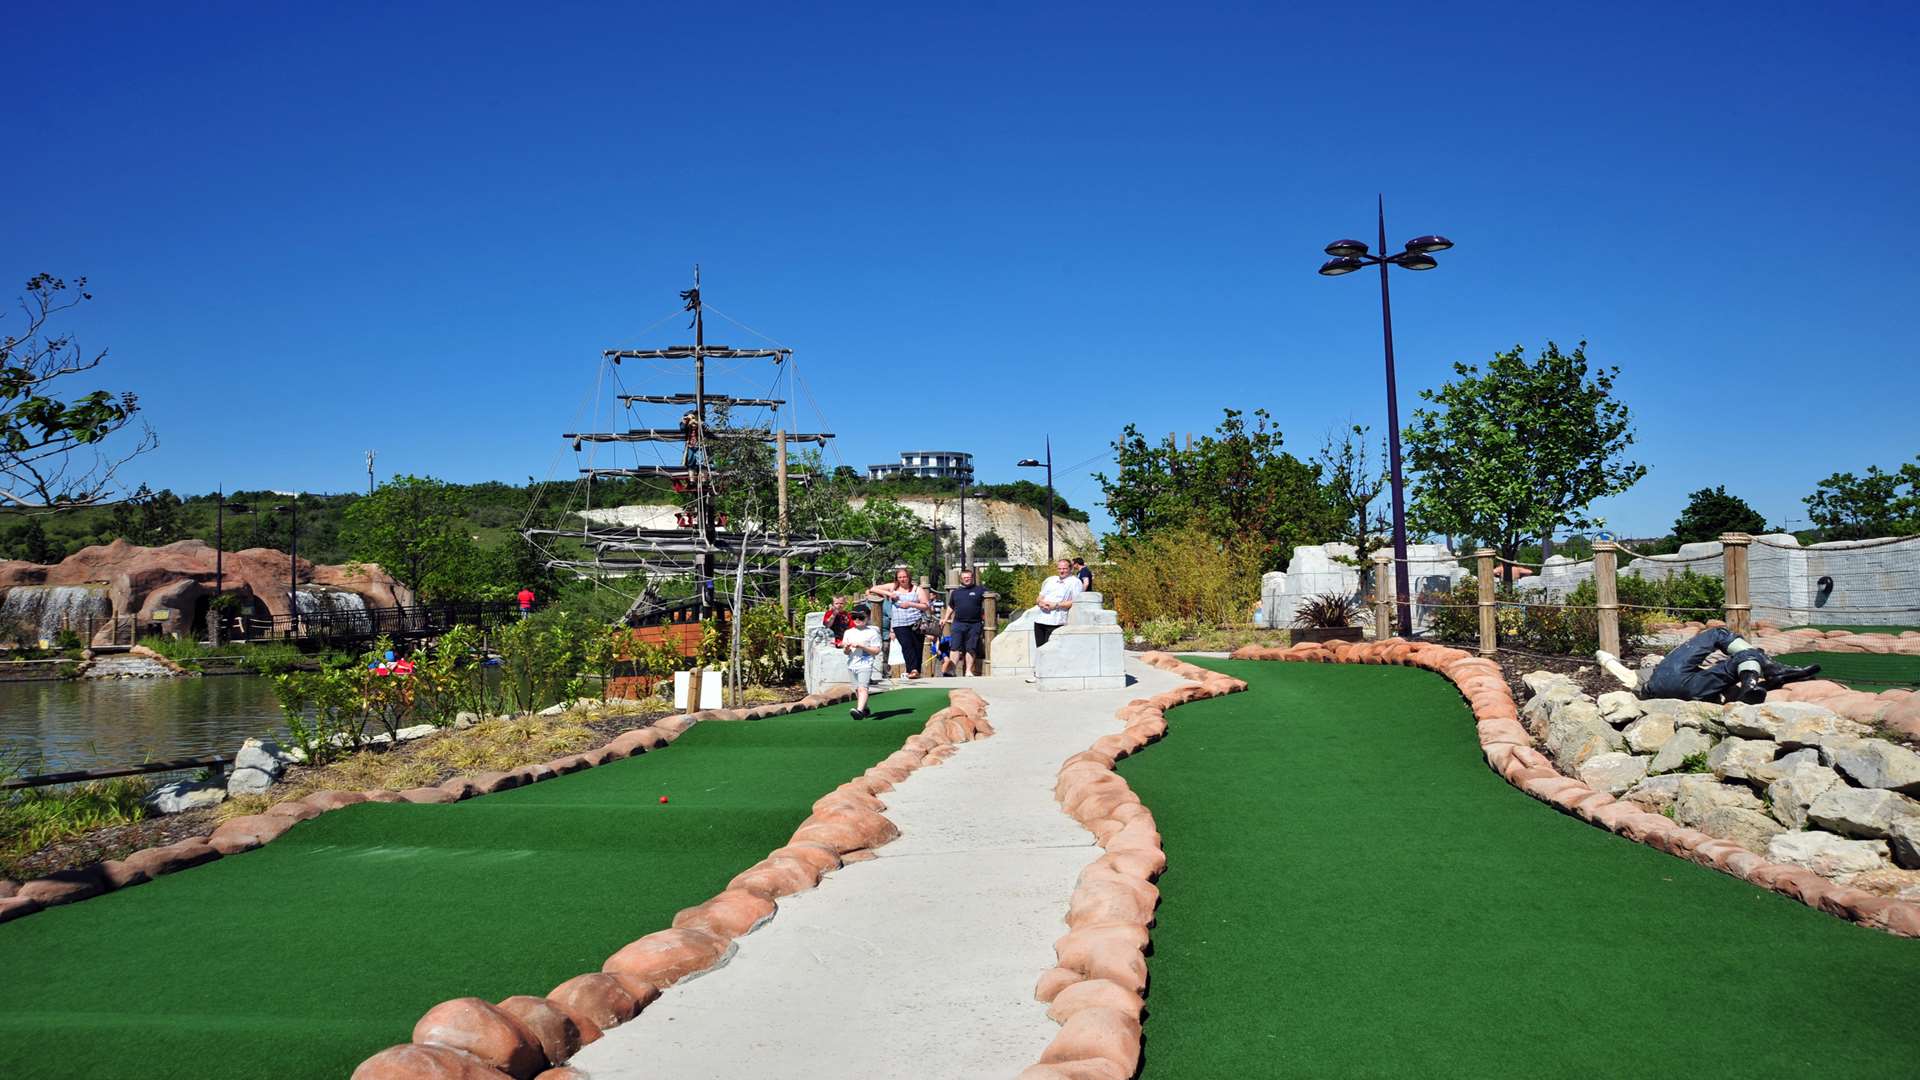 One of the mini golf courses at Pirate Cove Adventure Golf